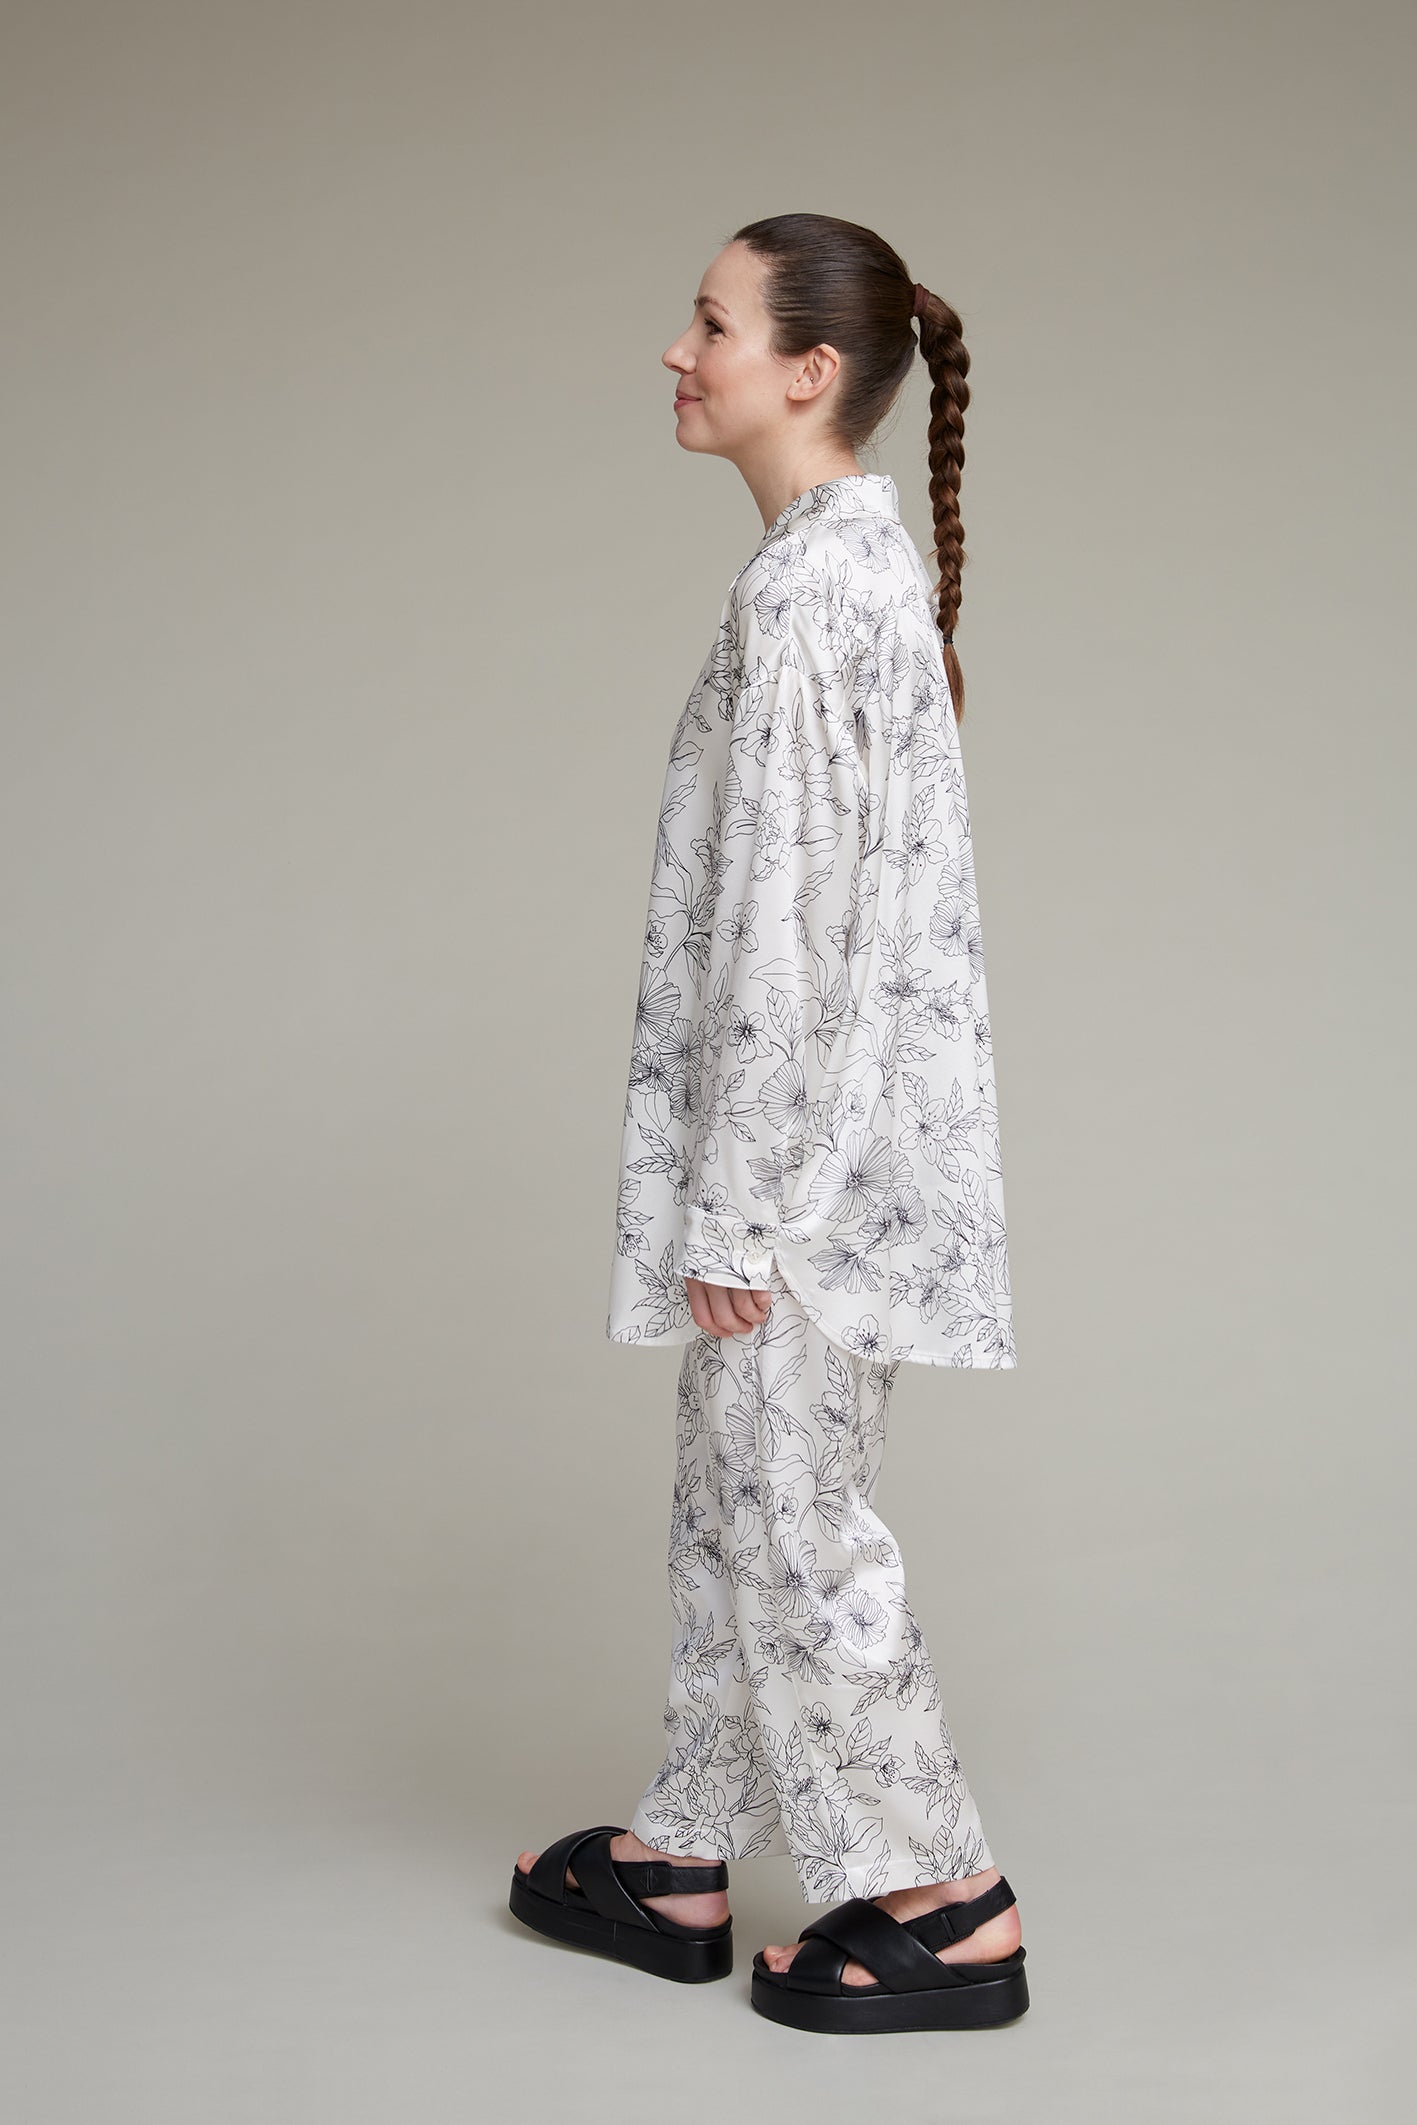 Woman in right-facing white floral-print loungewear pajama set, paired with black sandals, against neutral background, with long braid.